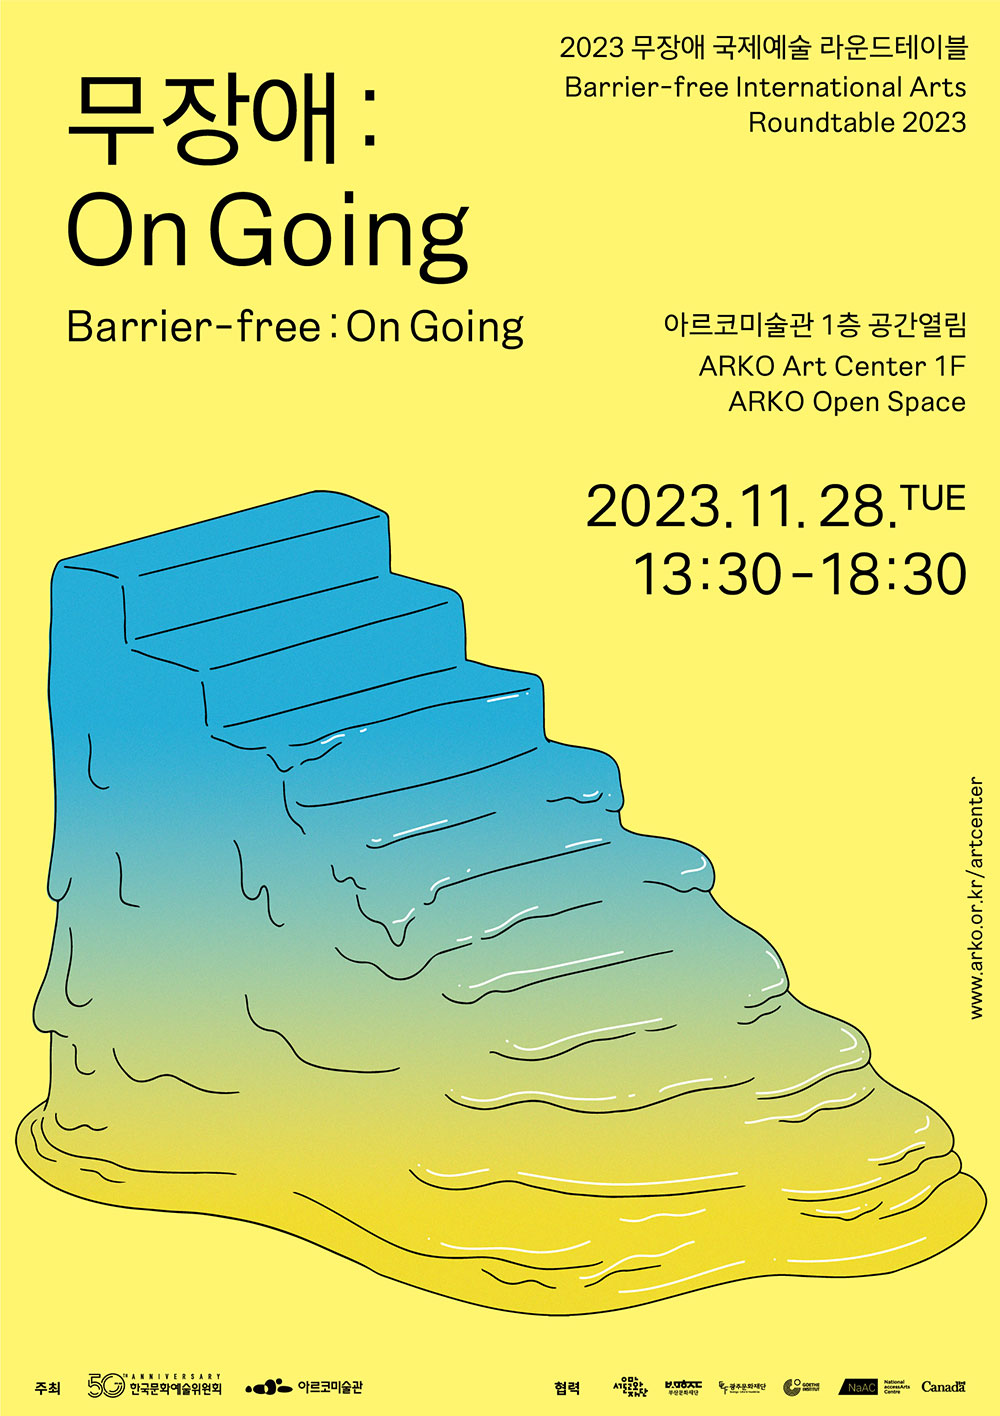 Image of the 2023 Barrier-free International Arts Roundtable poster. A large ice staircase is gradually collapsing under the warmth of solidarity and harmony.